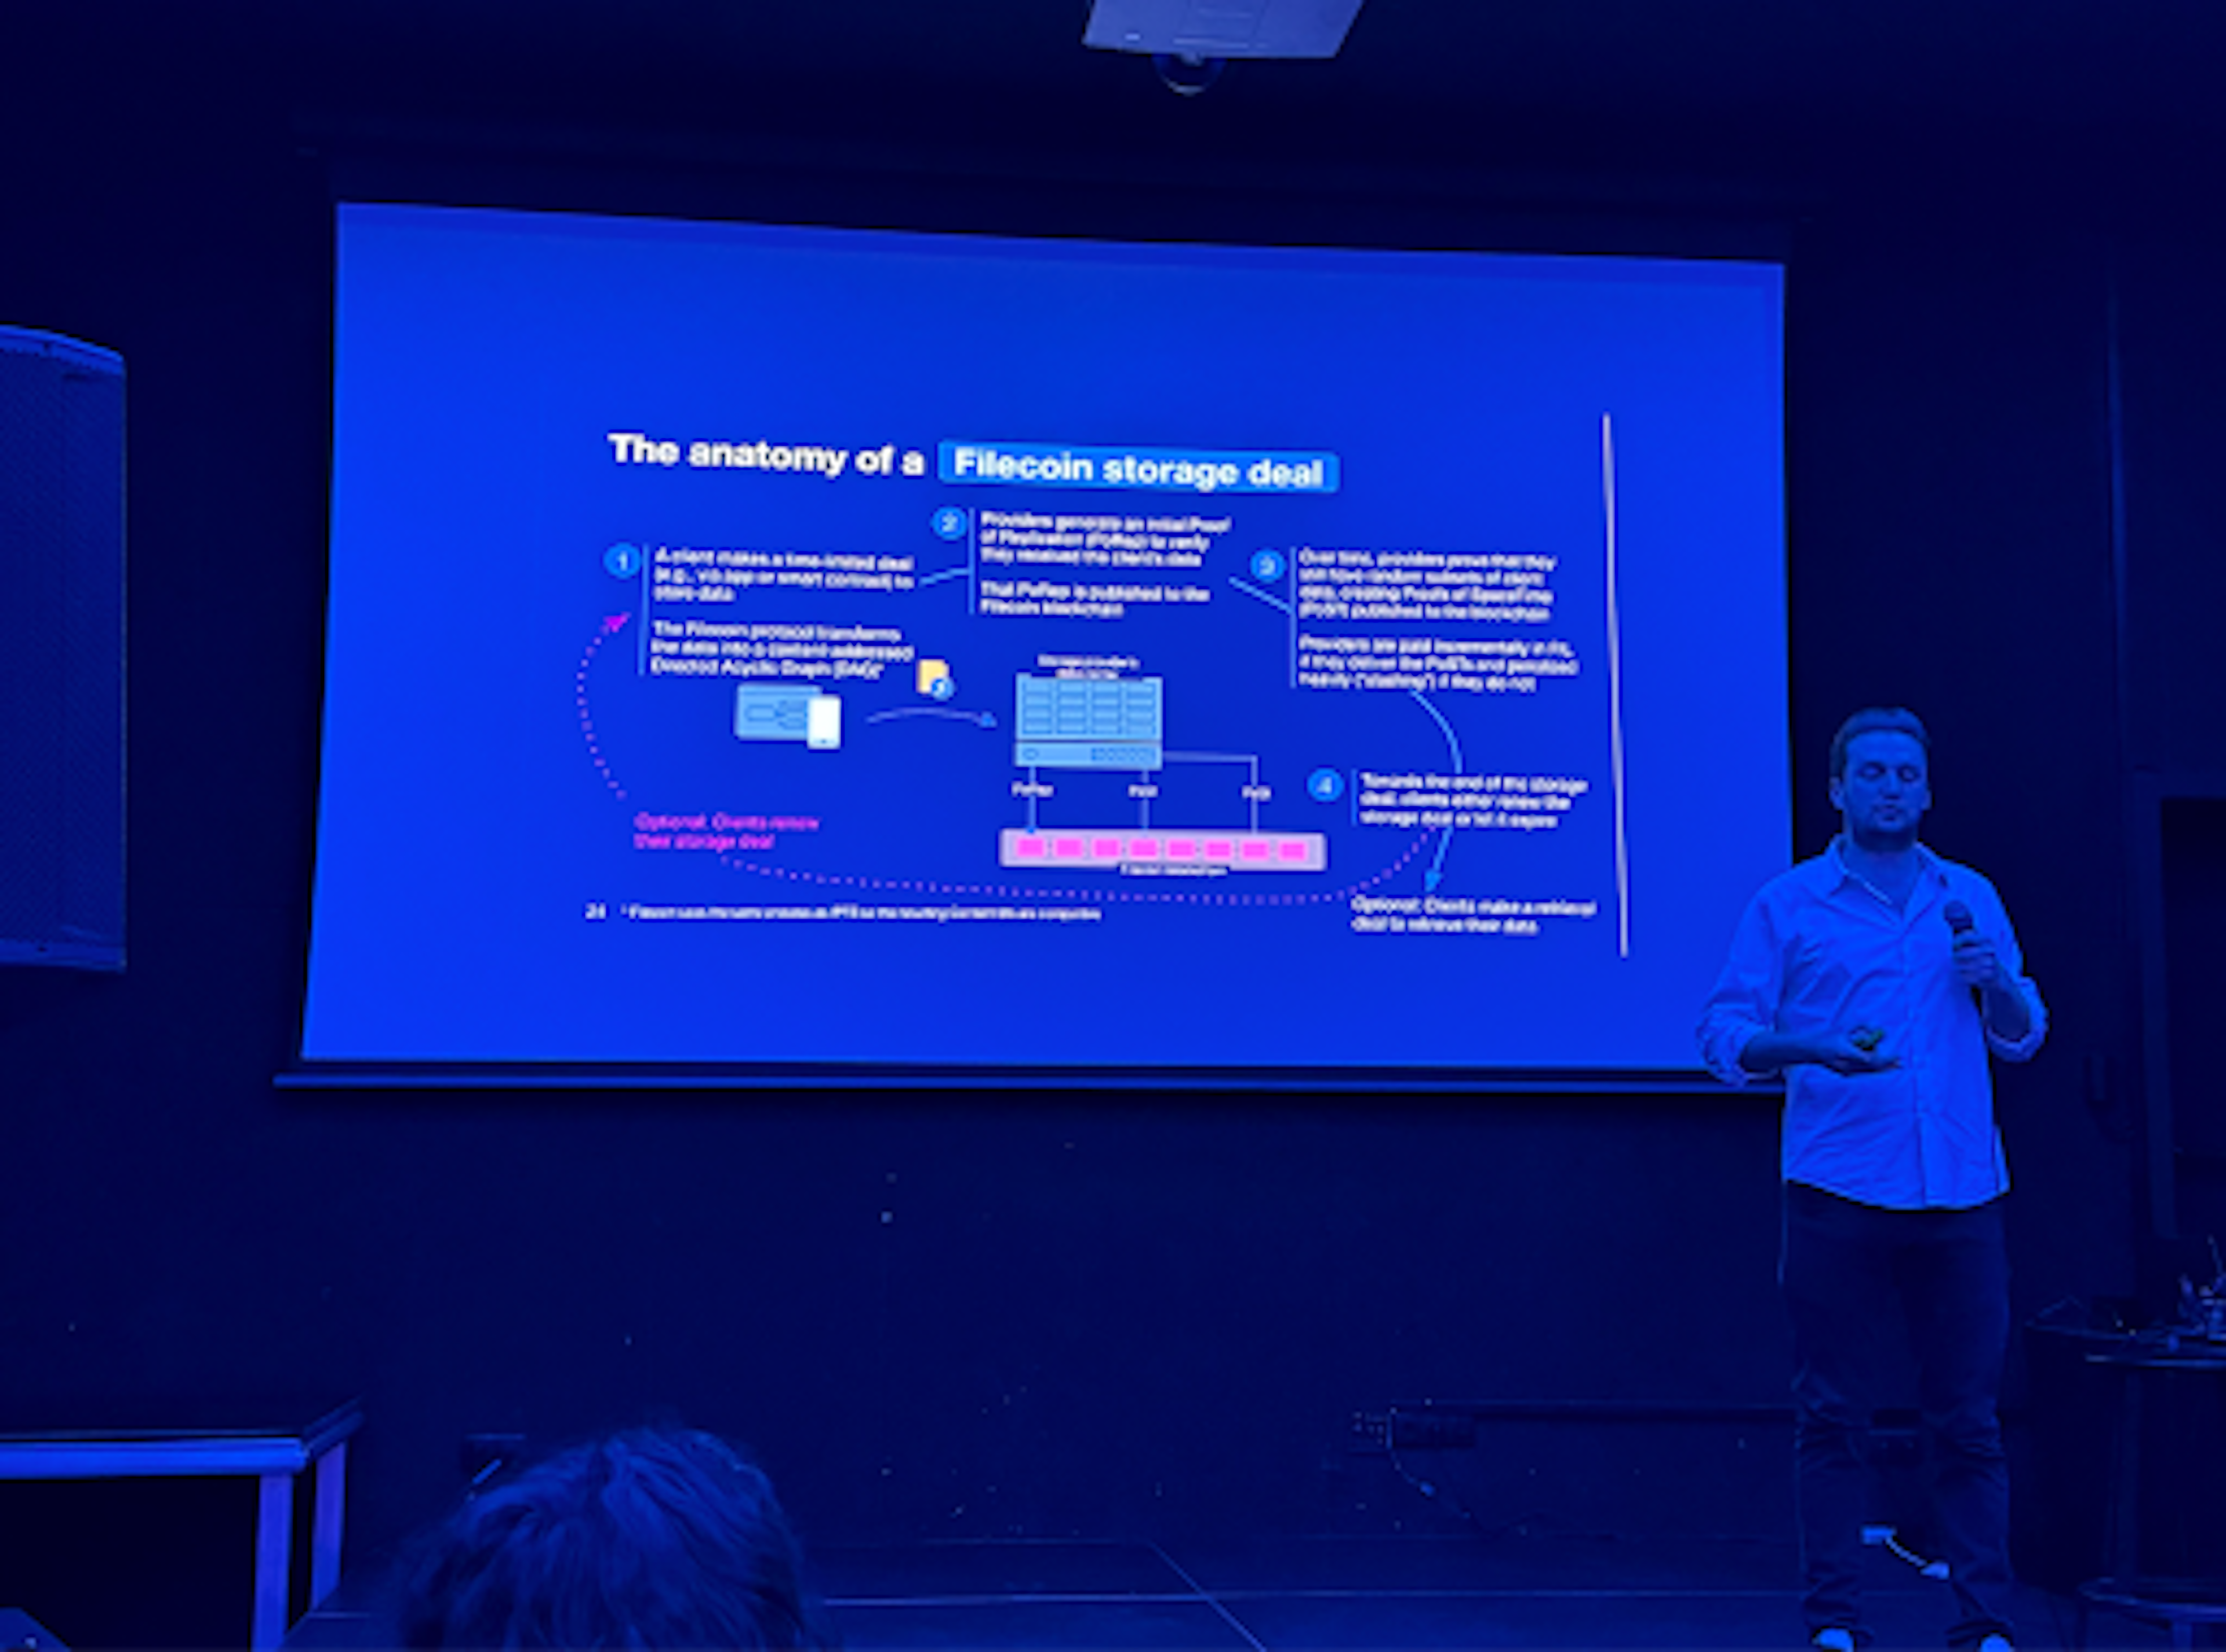 A person gives a presentation in a dark room with a blue slide titled "The anatomy of a Filecoin storage deal."